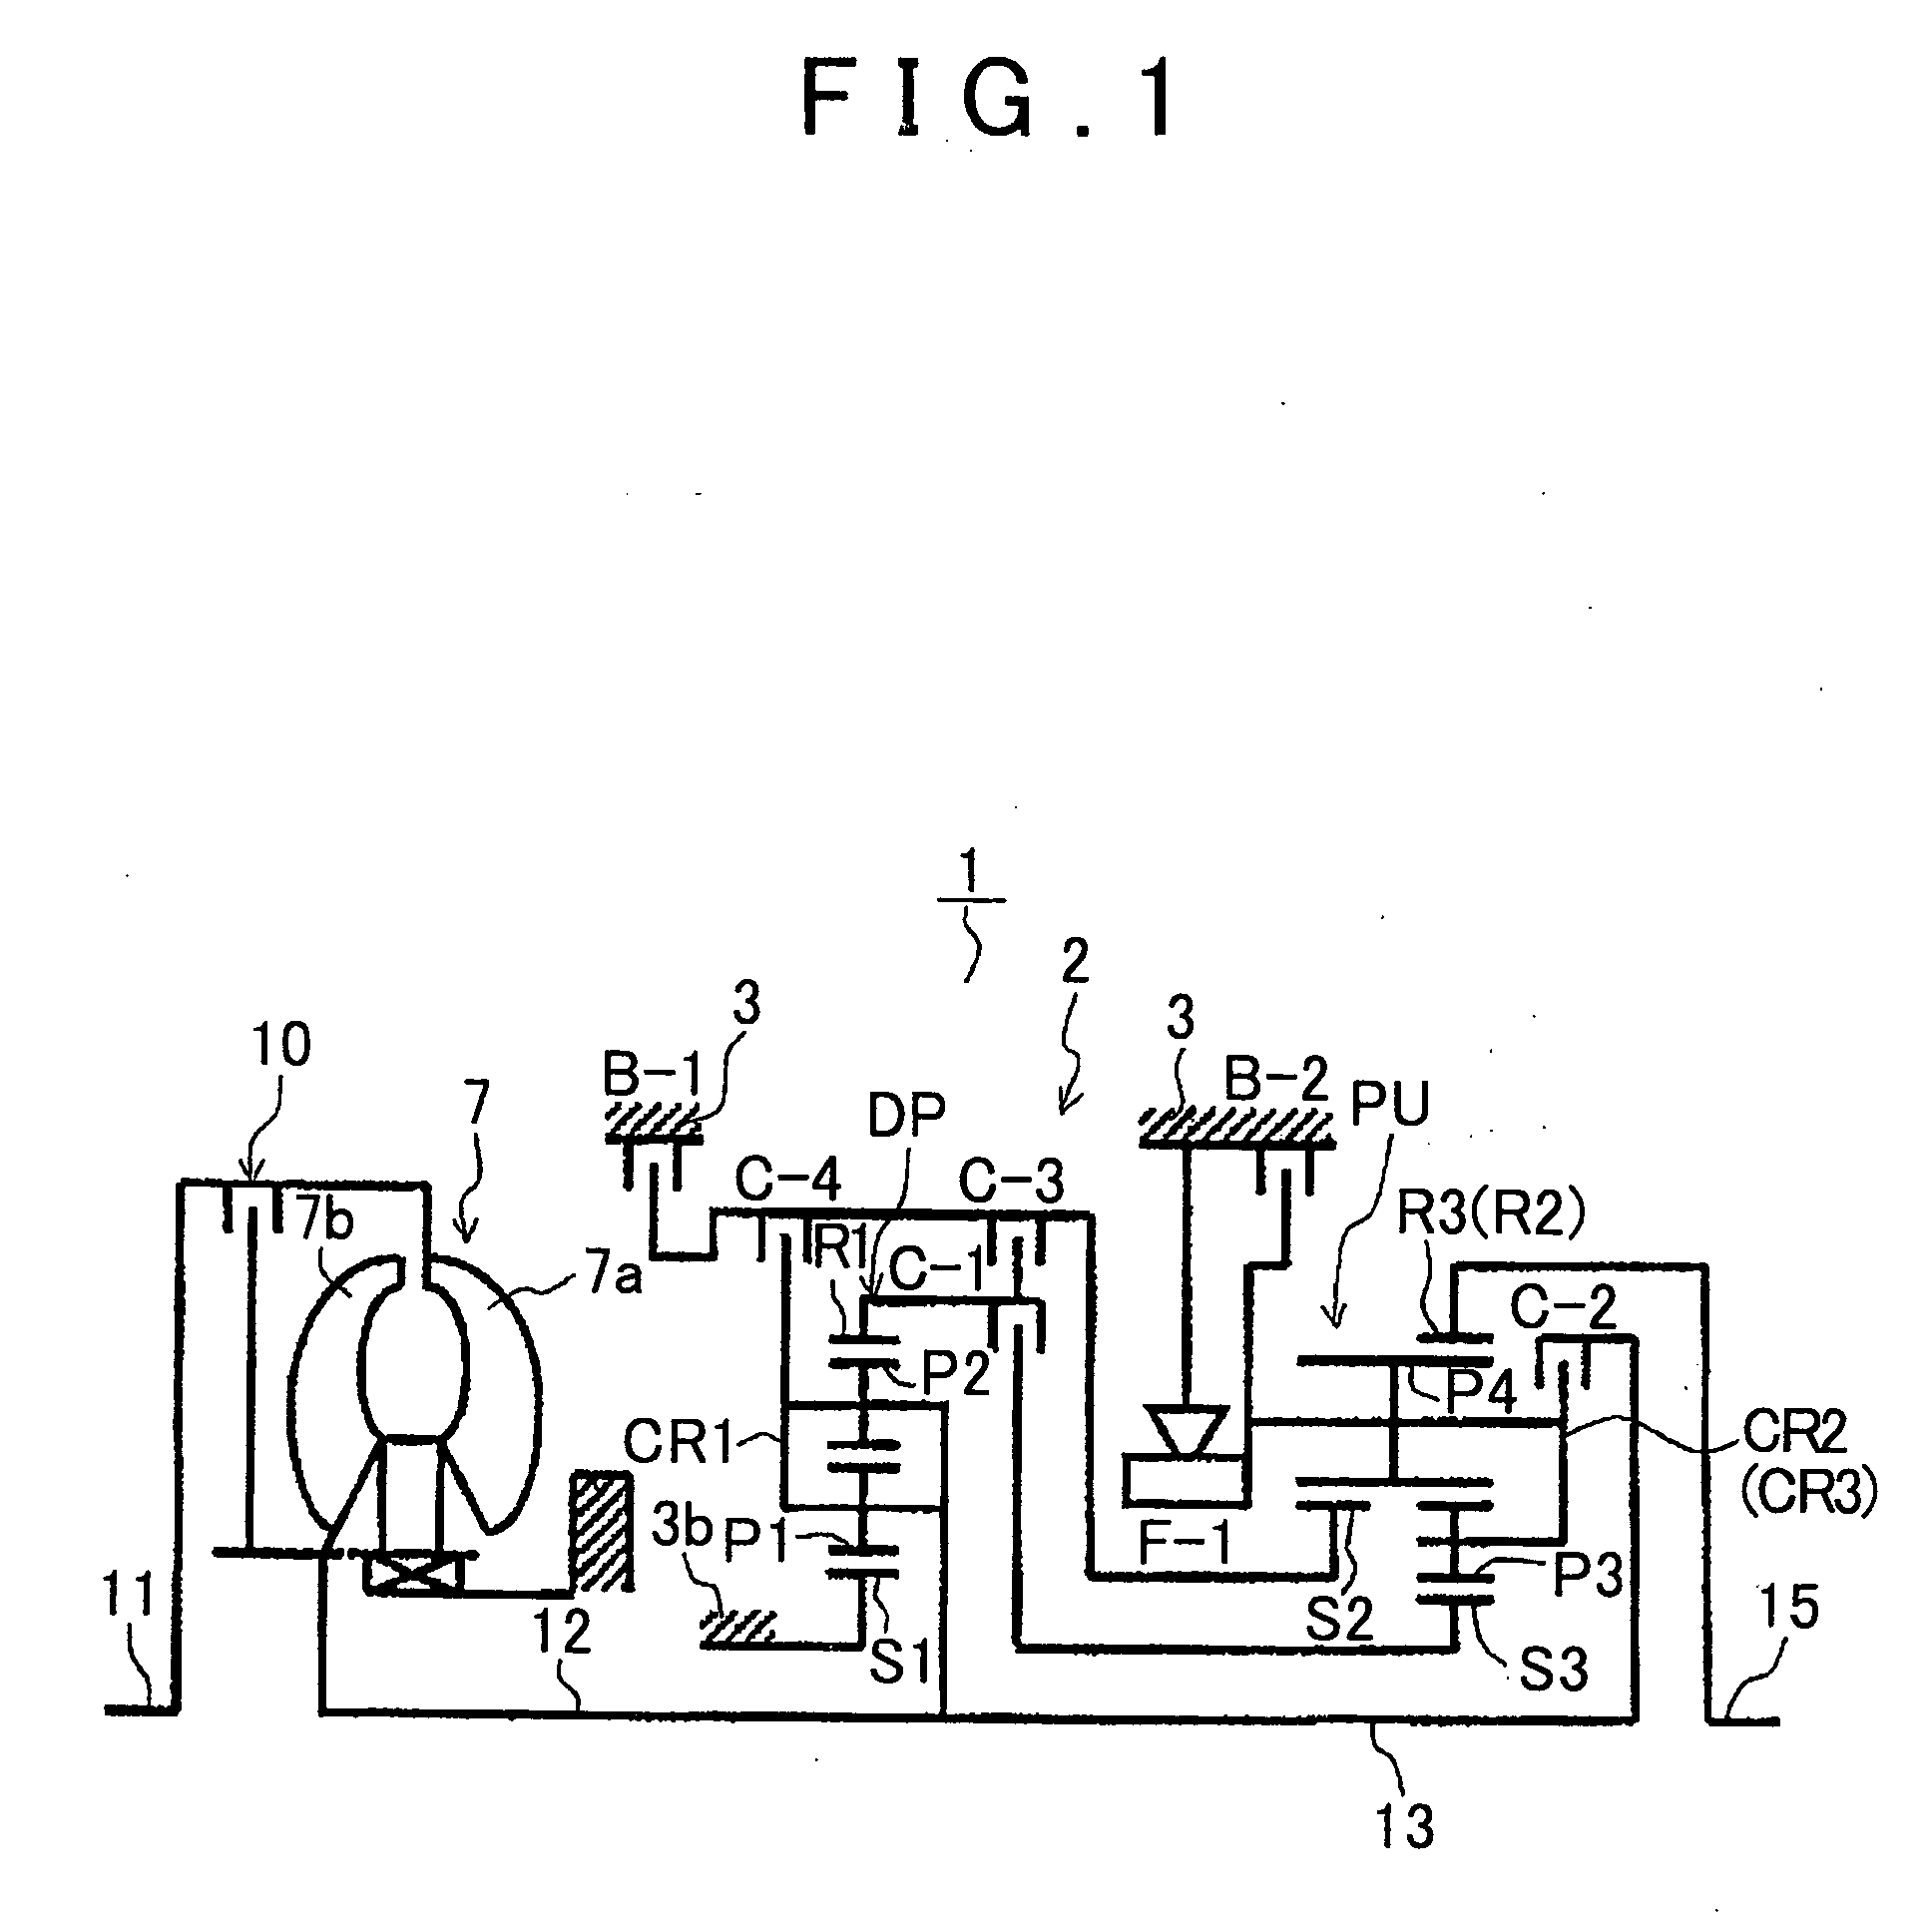 Hydraulic control apparatus for a multi-stage automatic transmission